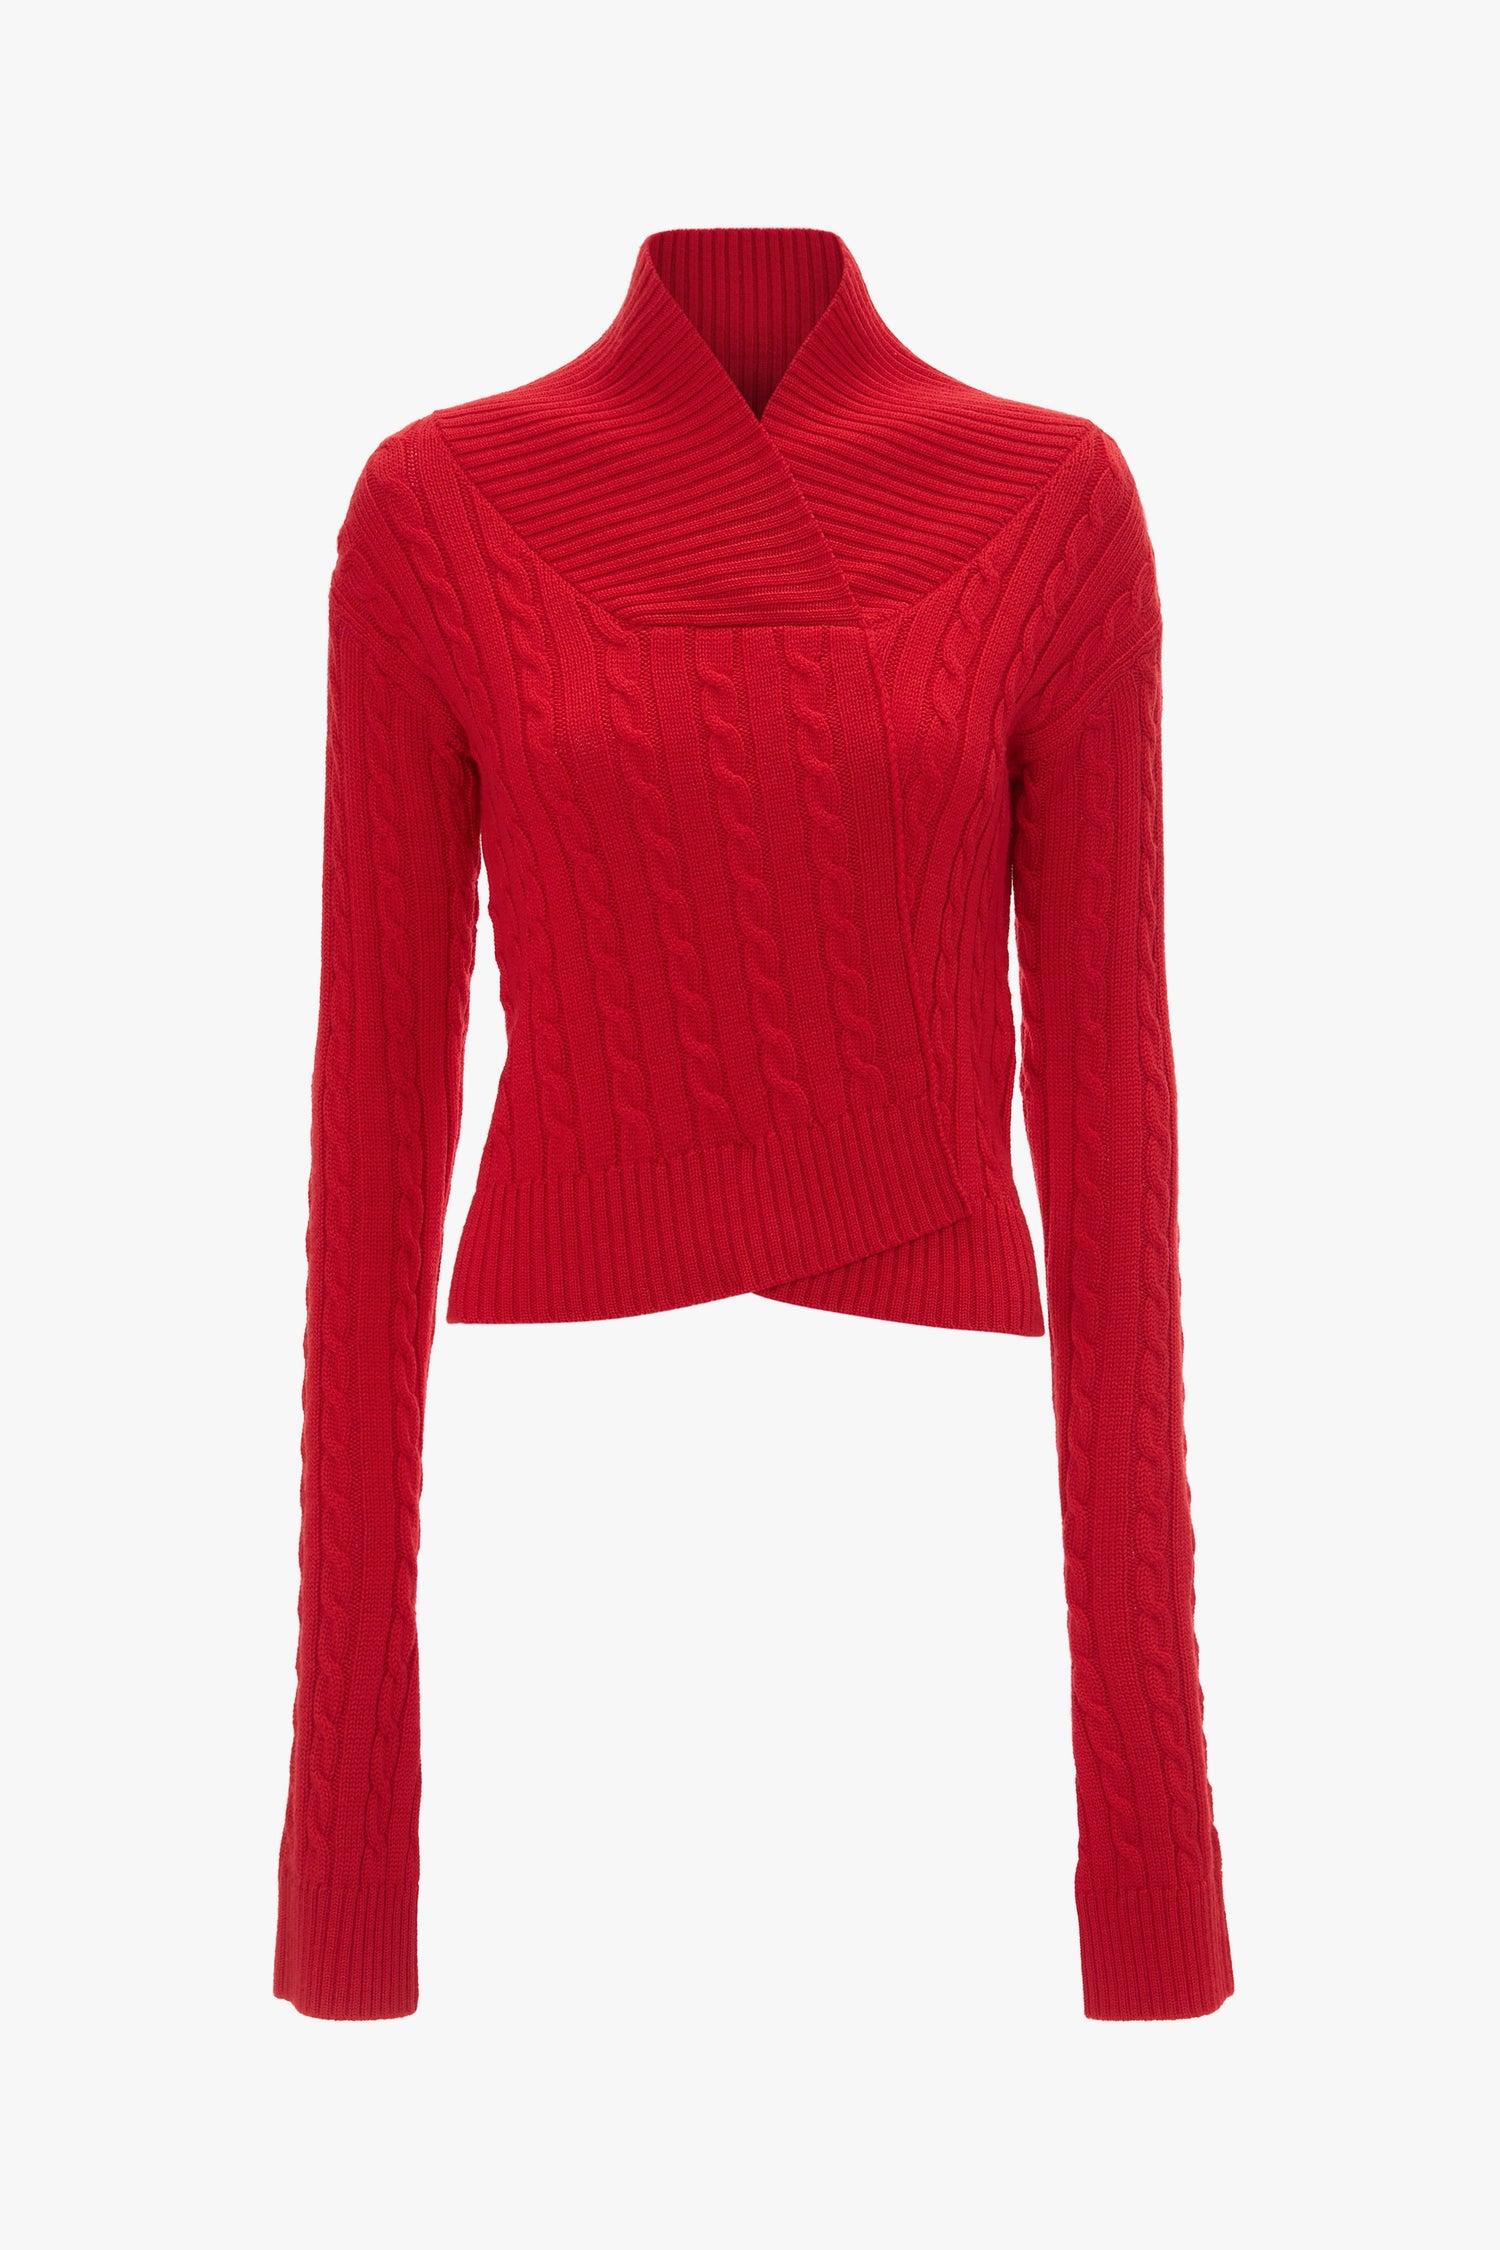 The Victoria Beckham brand presents the Wrap Detail Jumper In Red, crafted from soft merino wool. It features long sleeves and a wrap-style collar, perfectly showcased against a white background.